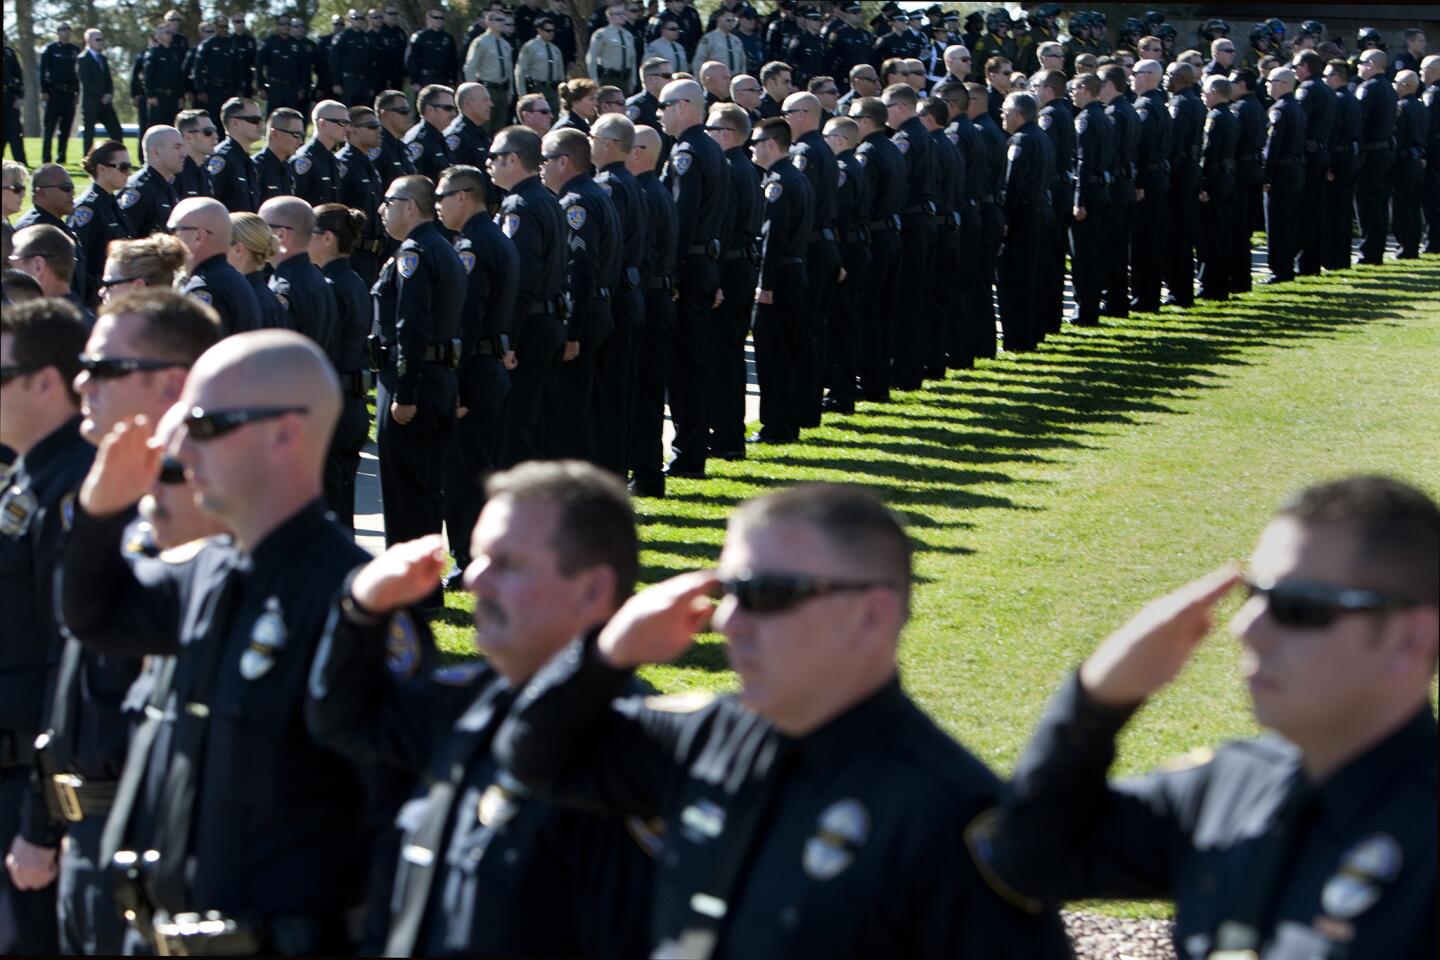 Funeral for Officer Michael Crain